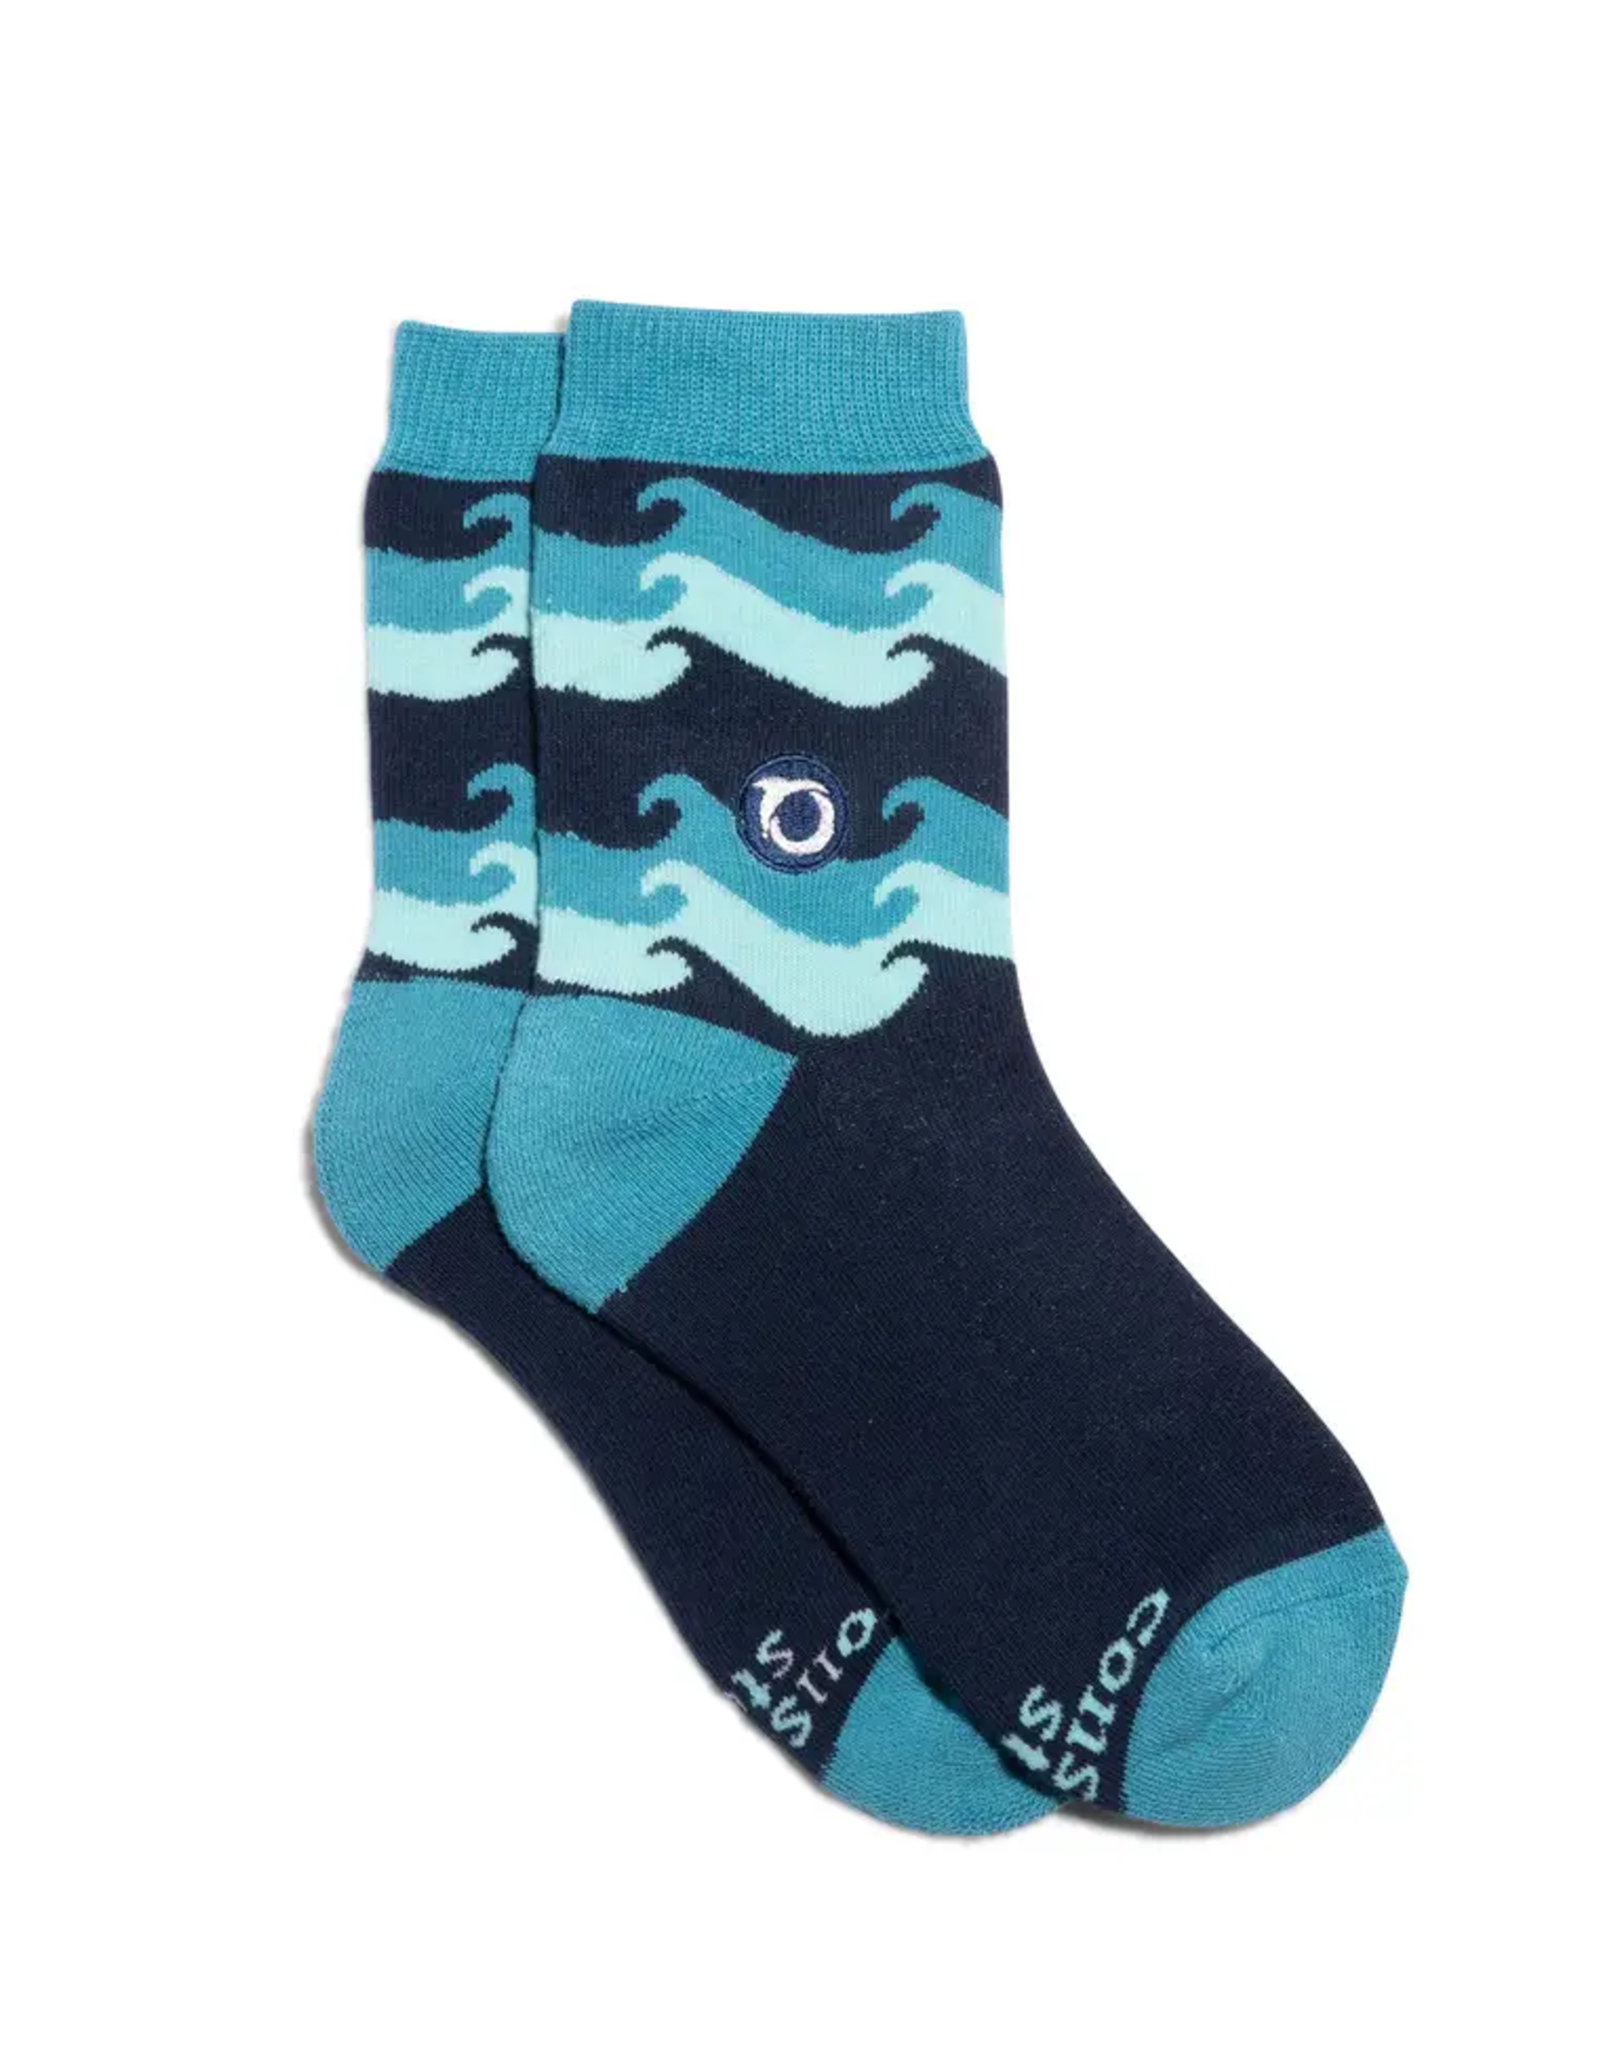 Trade roots Conscious Steps, Childrens Socks